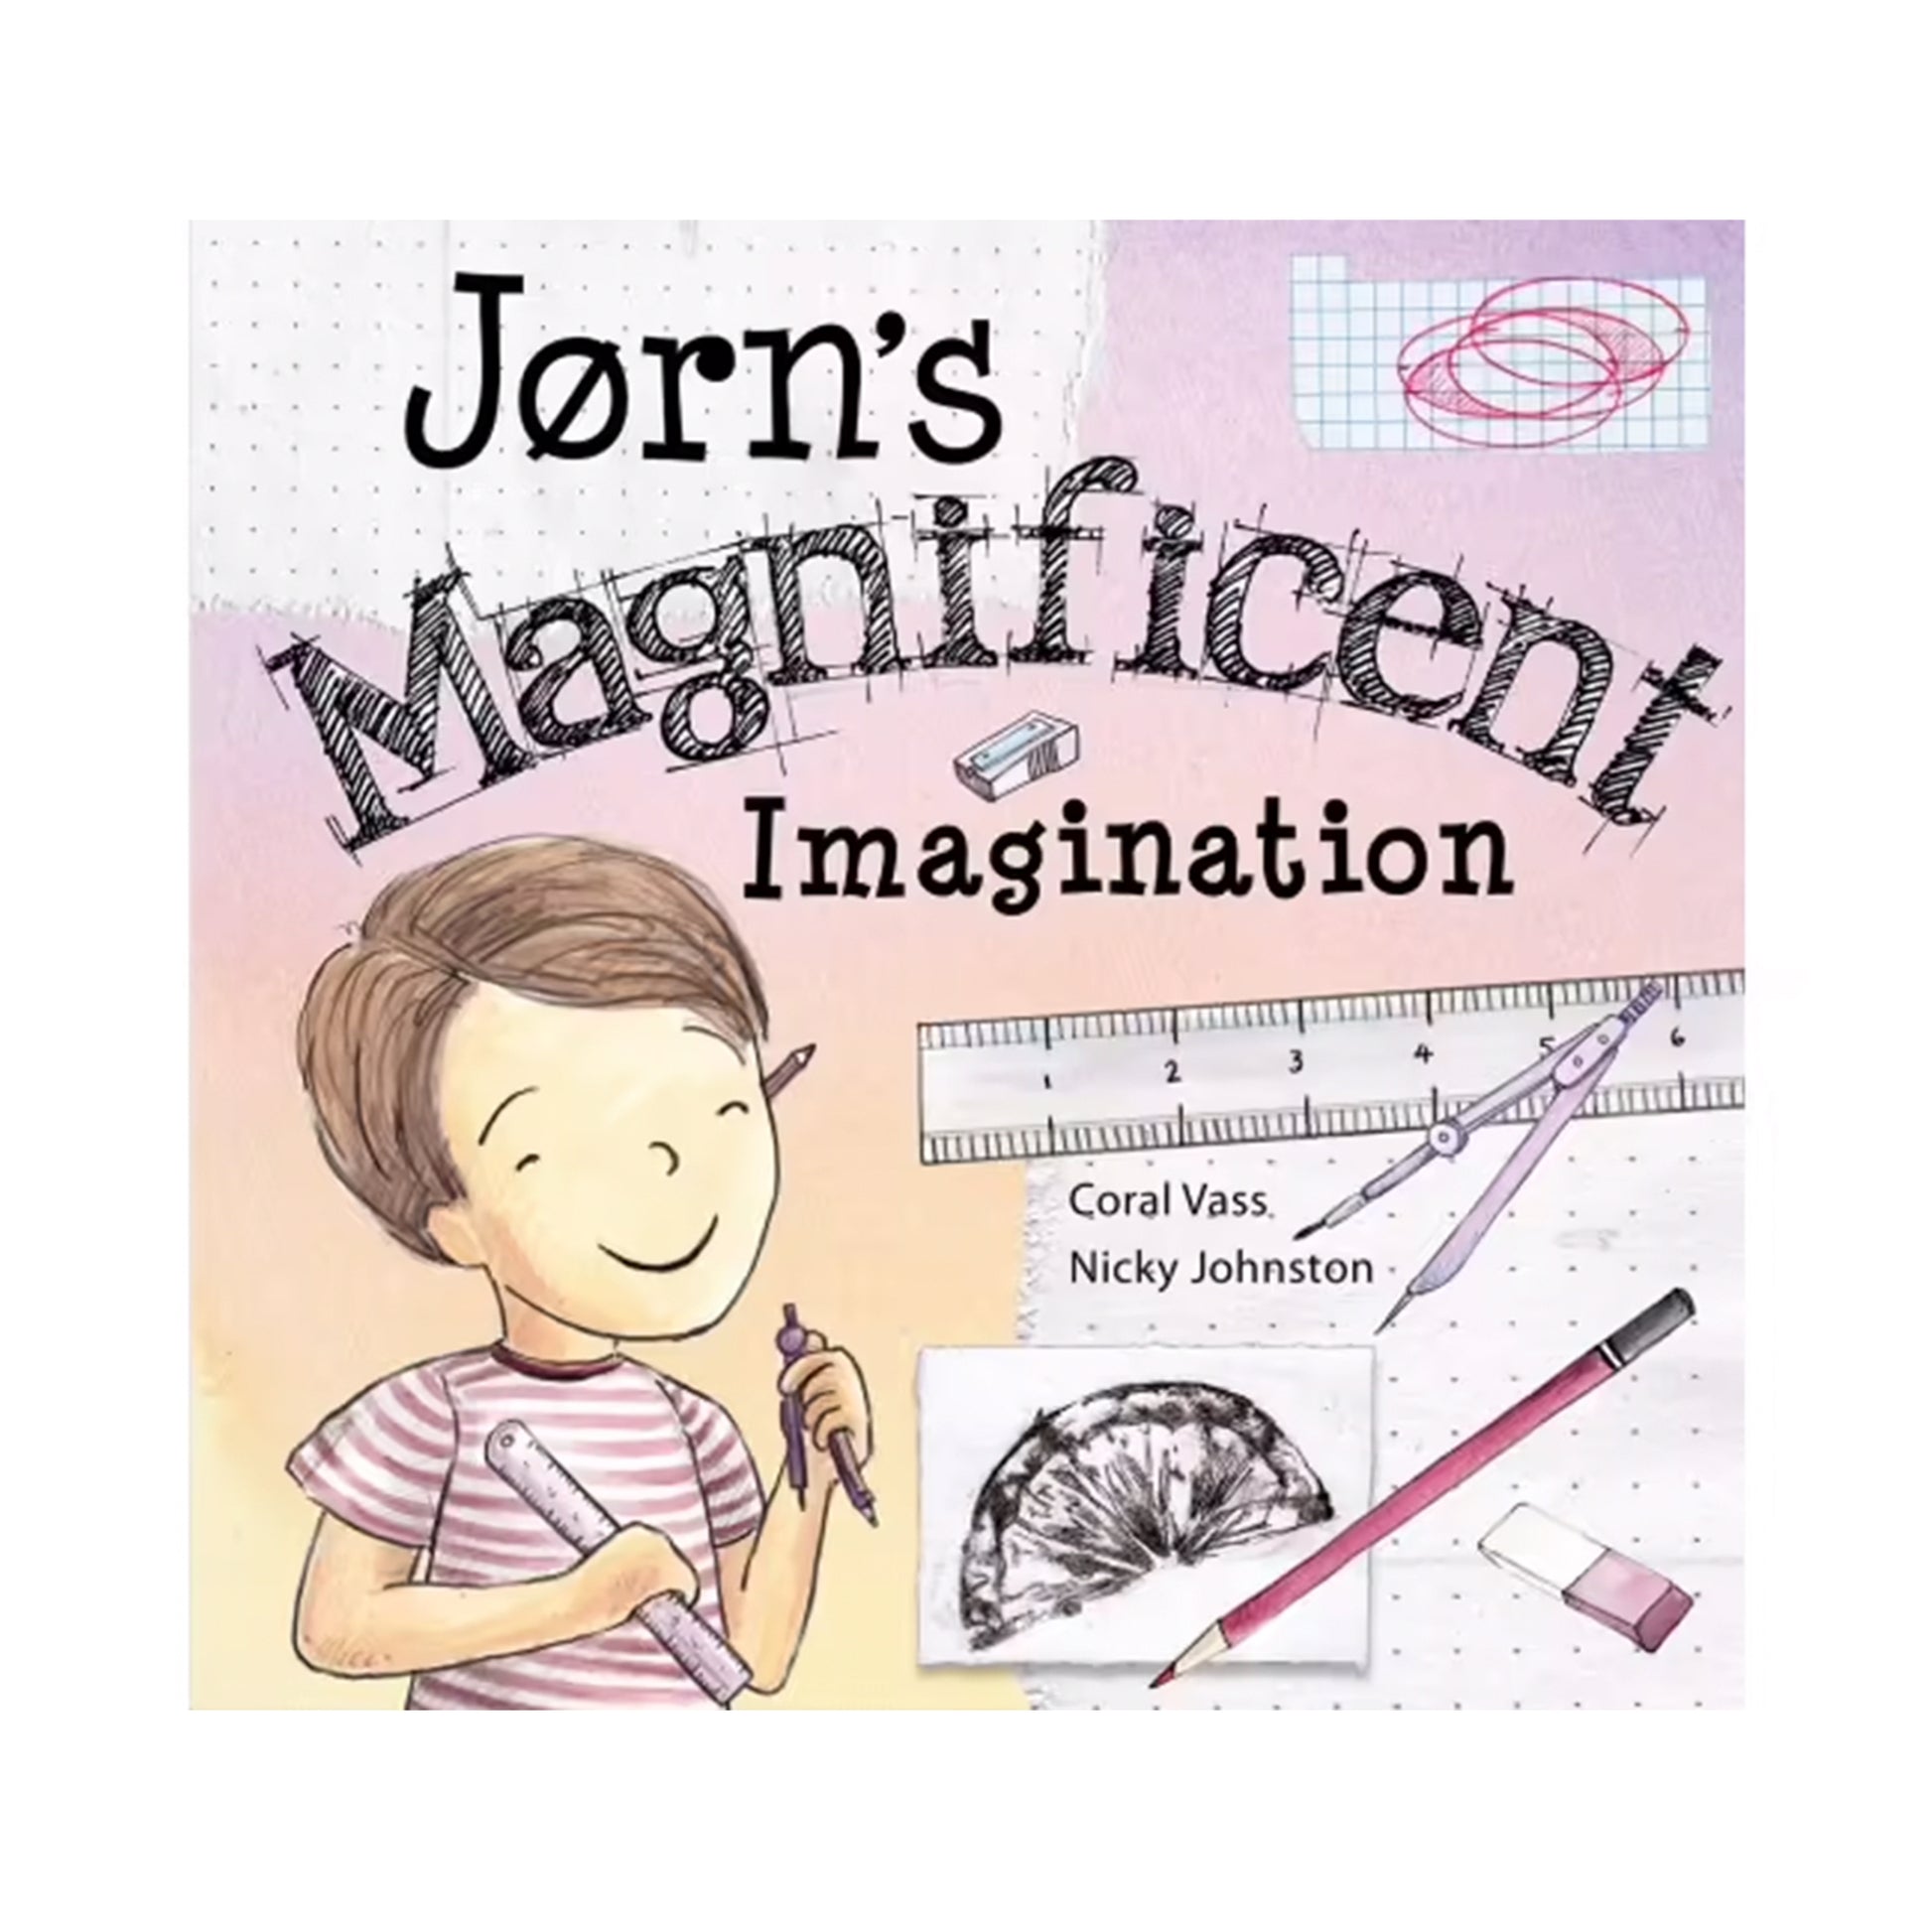 Book cover: A colorful abstract artwork bursting with creativity, showcasing Jenn's magnificent imagination